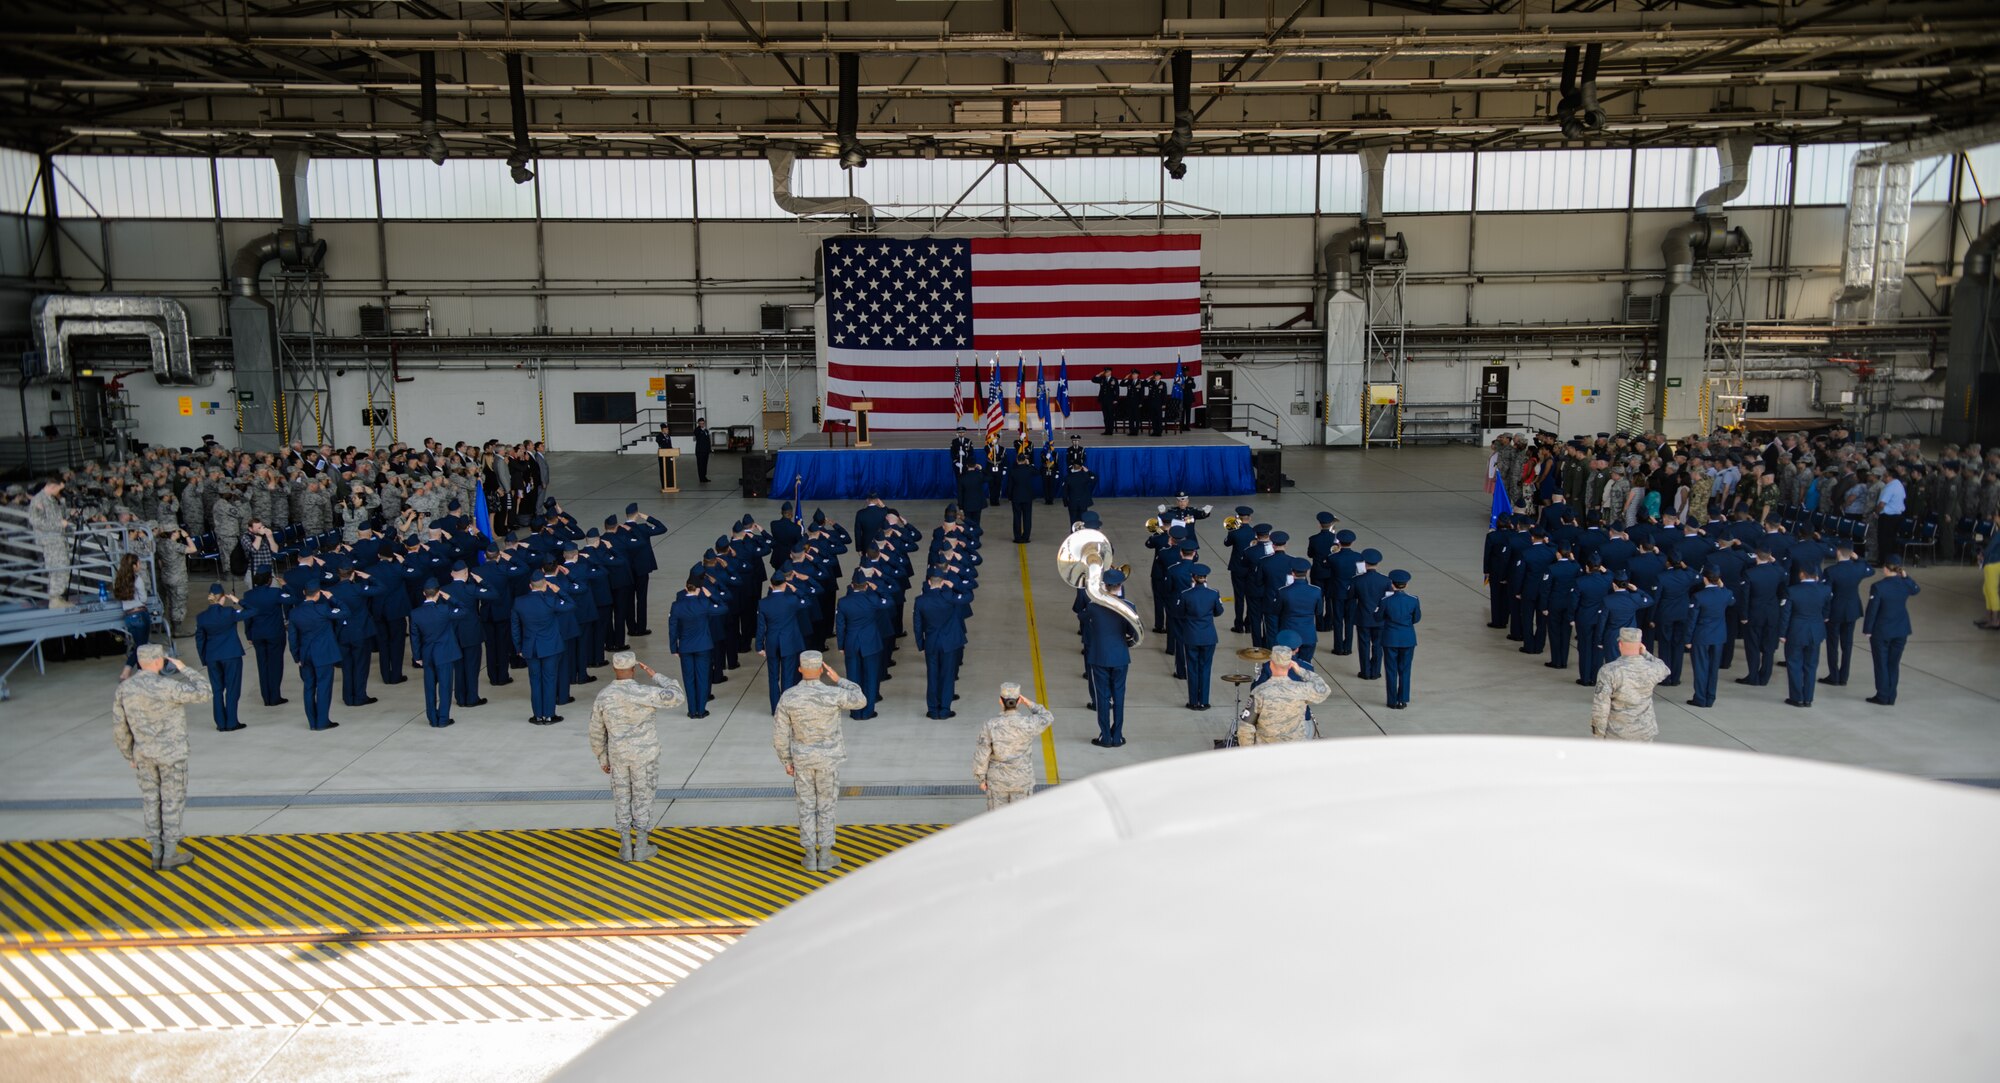 Airmen from the Third Air Force salute as the U.S. Air Force in Europe and Air Forces Africa band plays the national anthem July 2, 2015, at Ramstein Air Base, Germany. Lt. Gen. Timothy Ray took command of the Third Air Force and 17th Expeditionary Air Force during the change of command. (U.S. Air Force photo/ Staff Sgt. Armando A. Schwier-Morales)